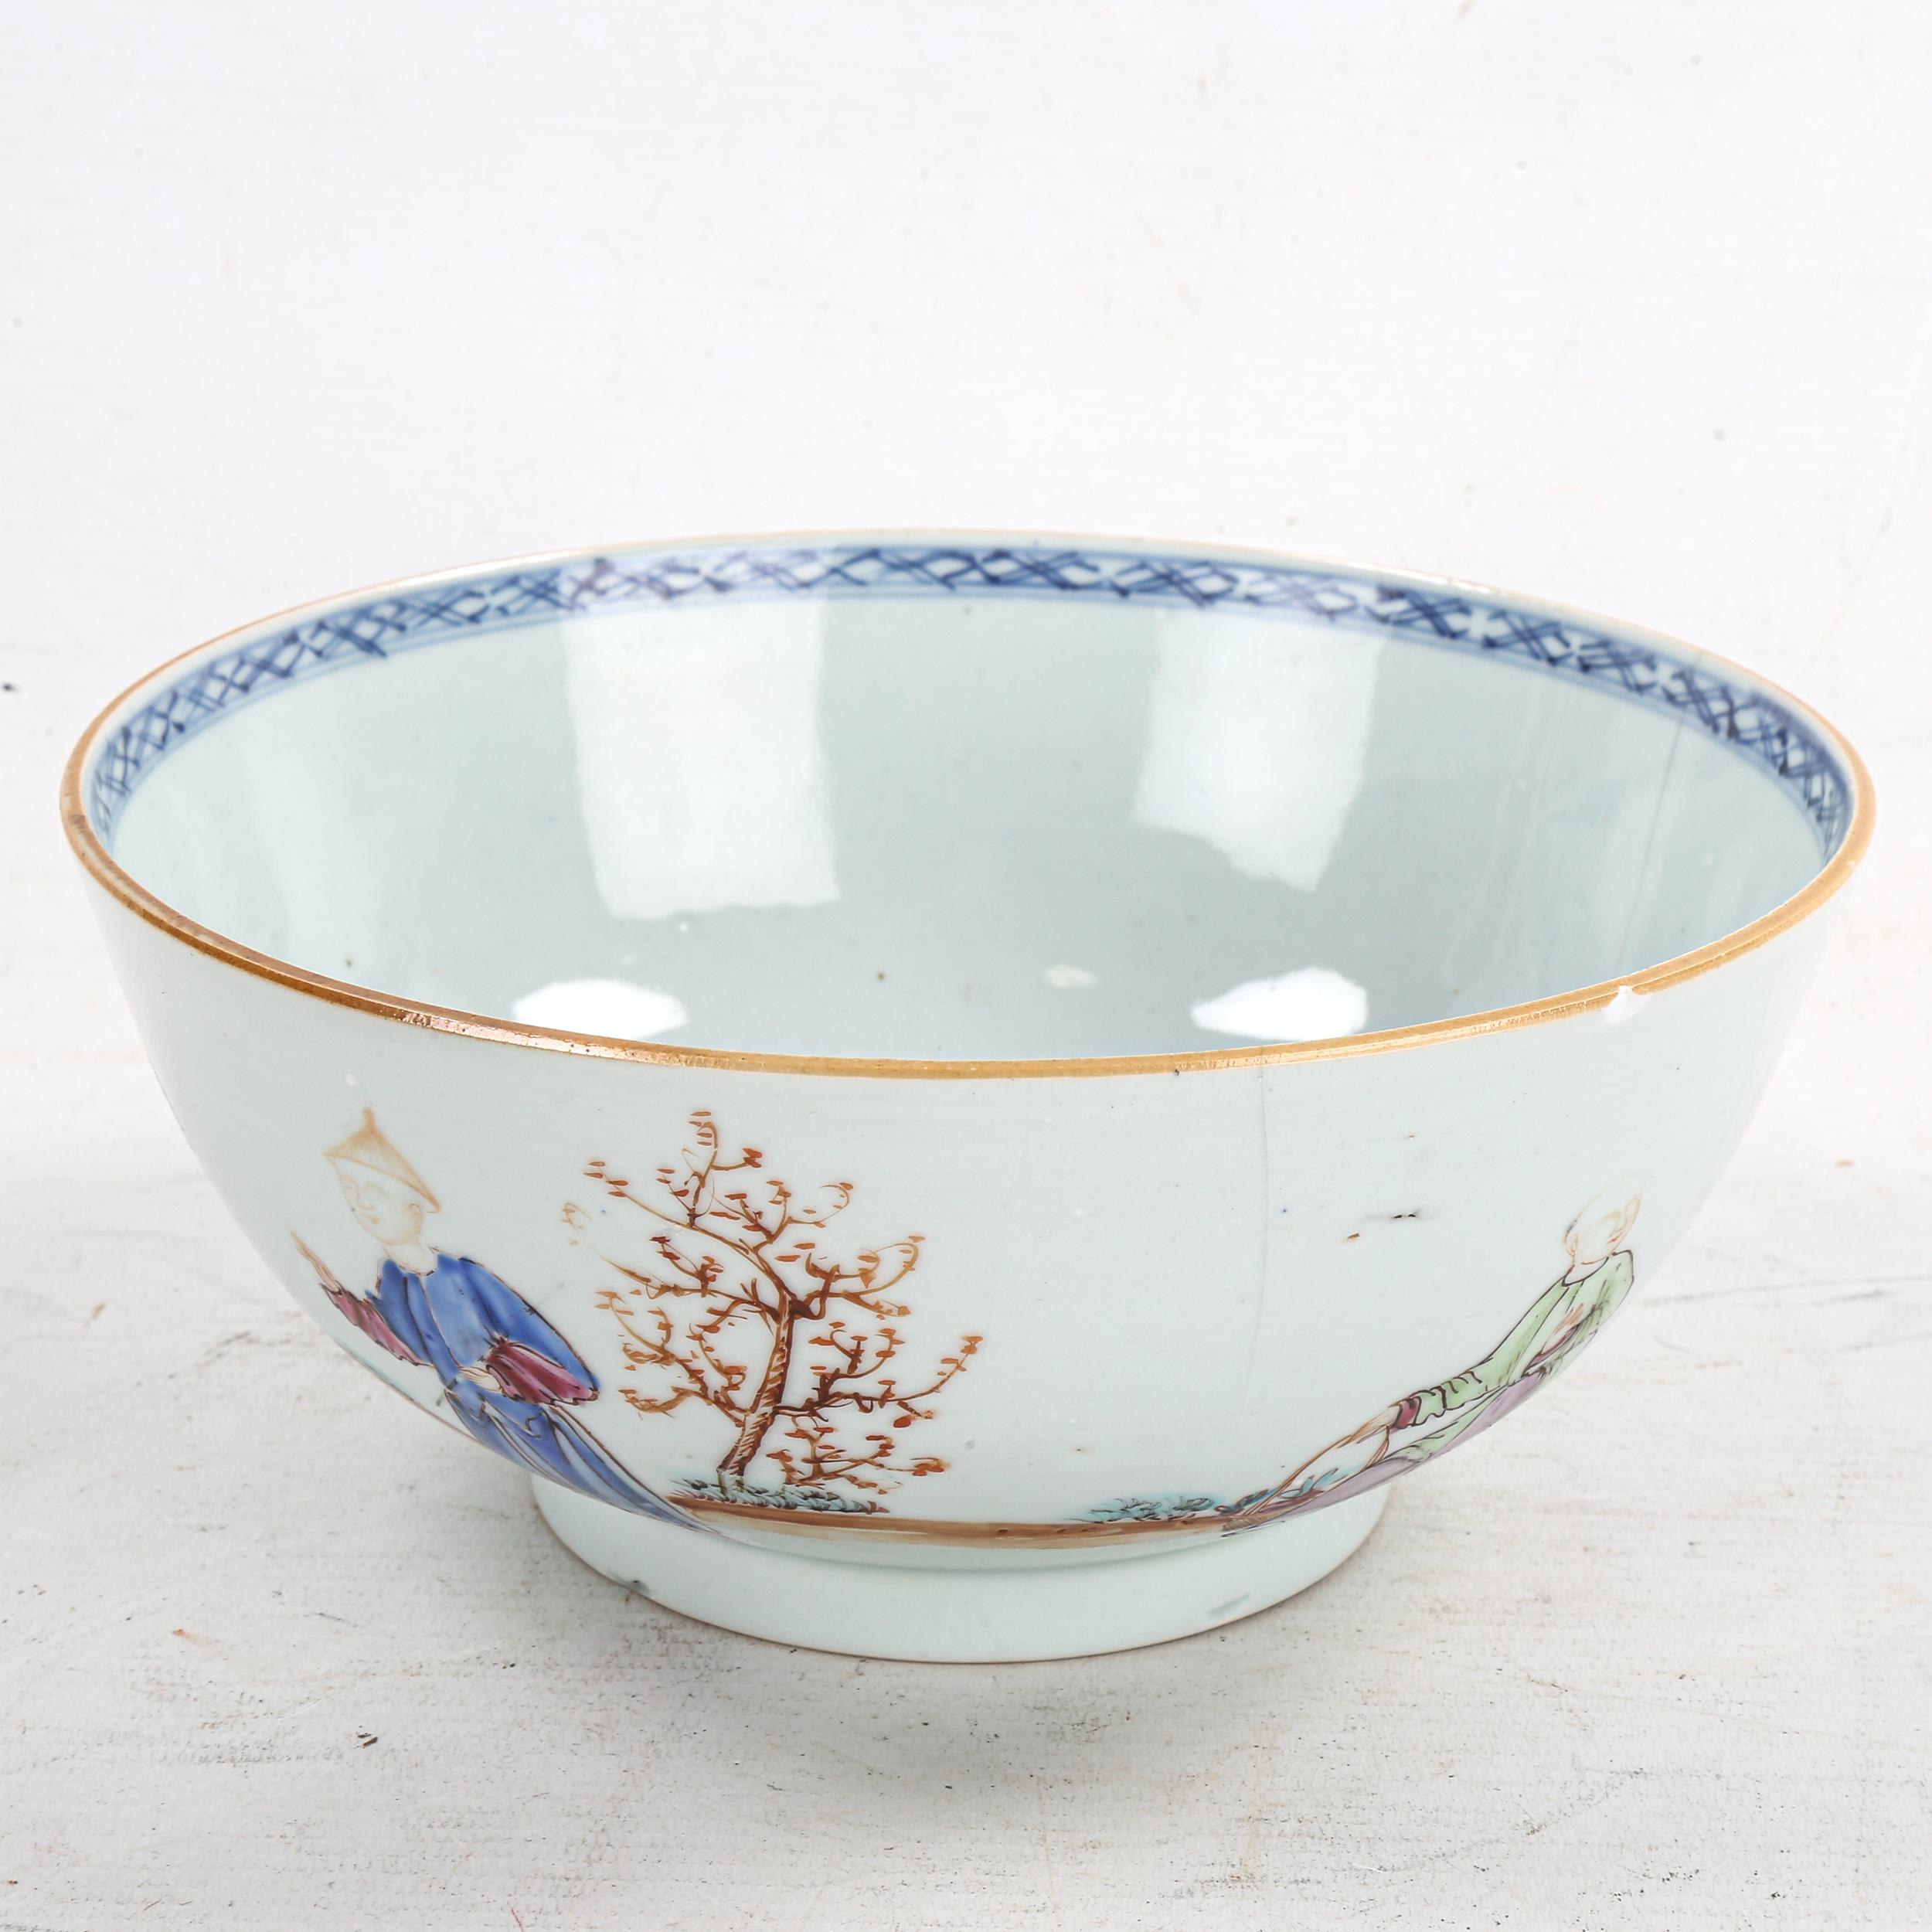 A 19th century Chinese porcelain bowl, with painted enamel figures, diameter 20cm